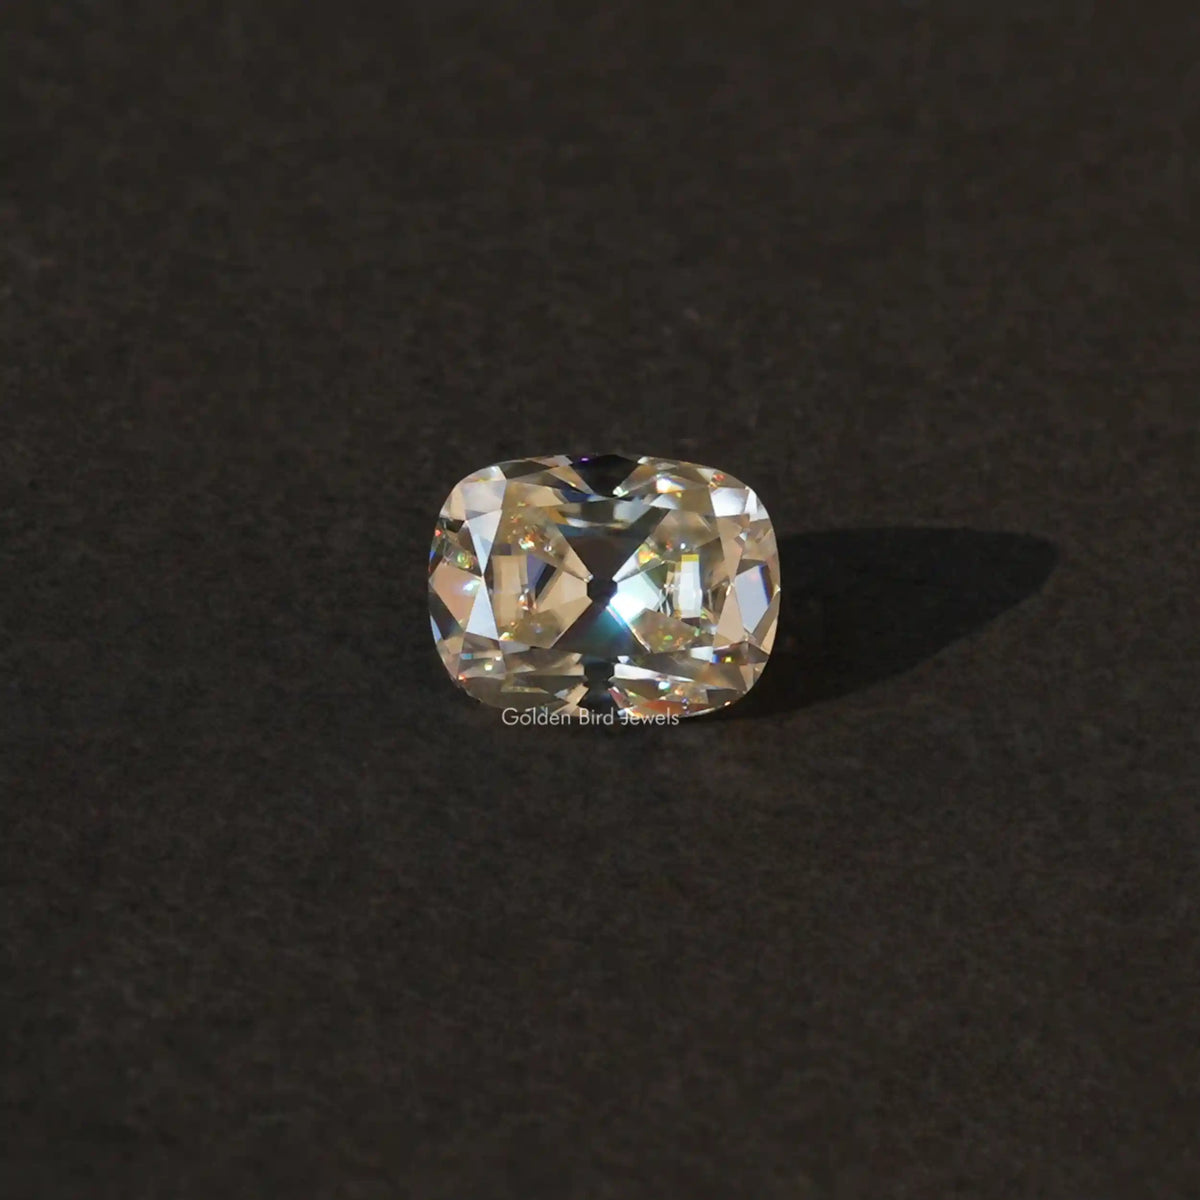 [This old mine cushion cut loose moissanite stone made of off white]-[Golden Bird Jewels]